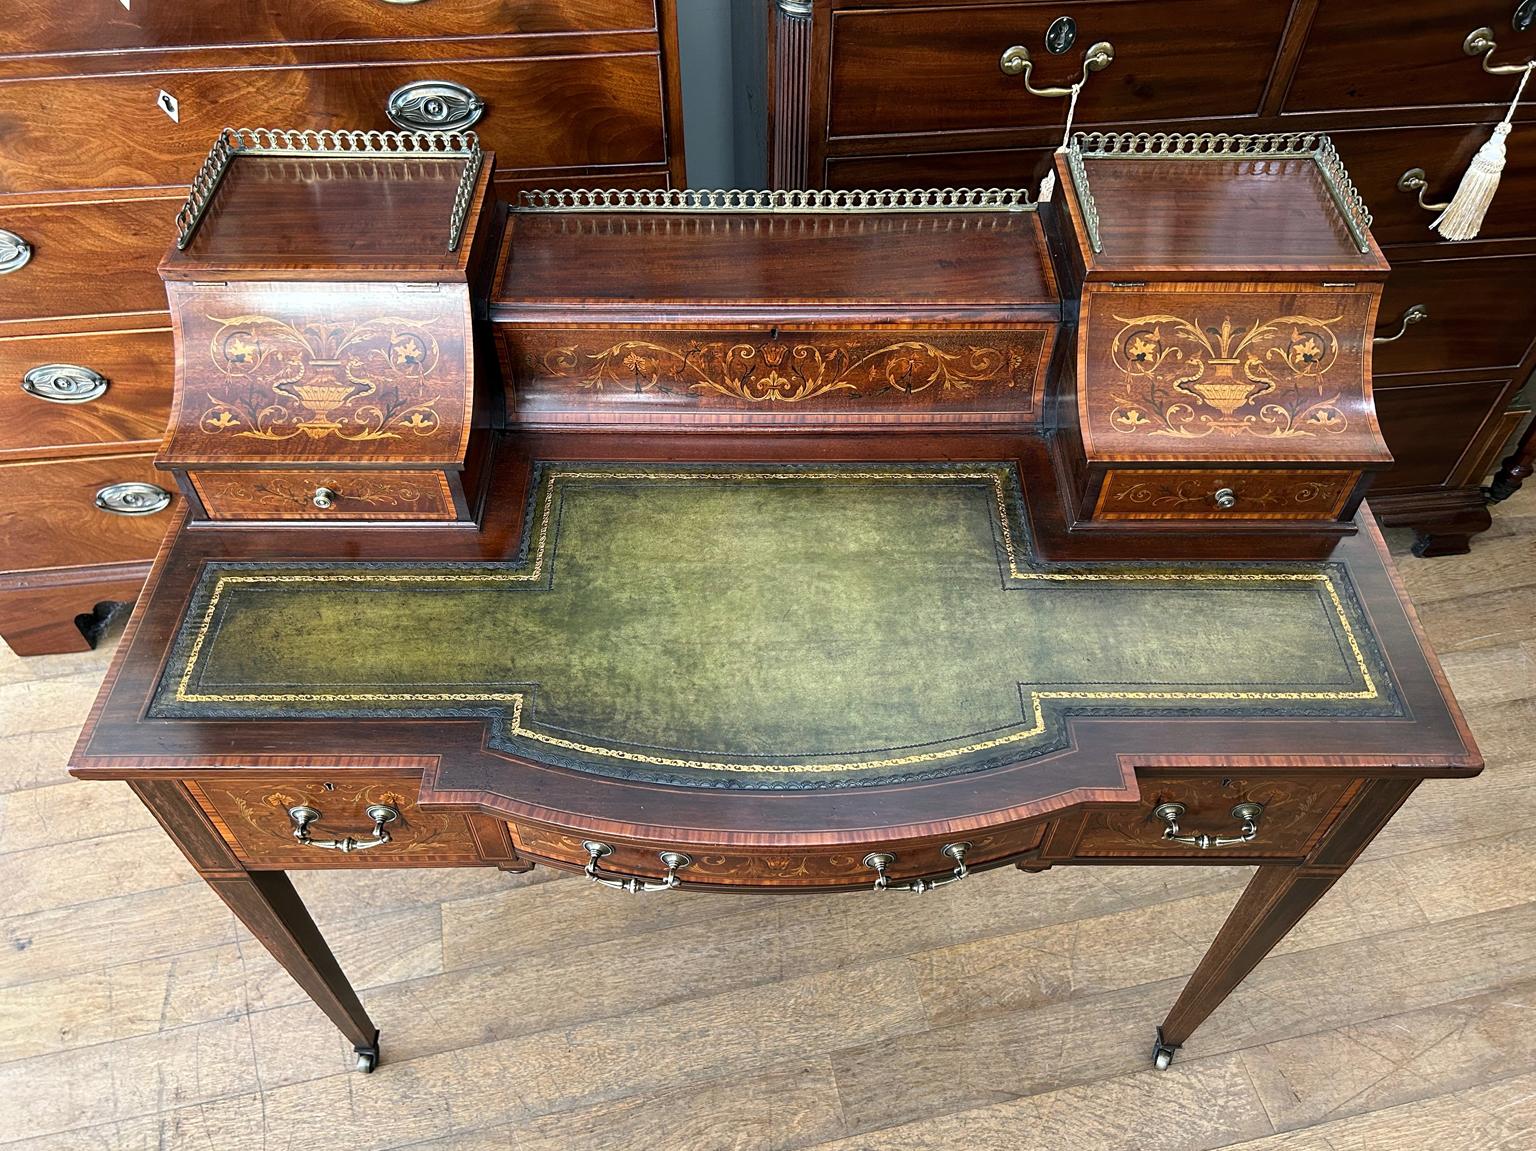 Hand-Crafted 19th Century Carlton House Desk by: Maple & Co. London